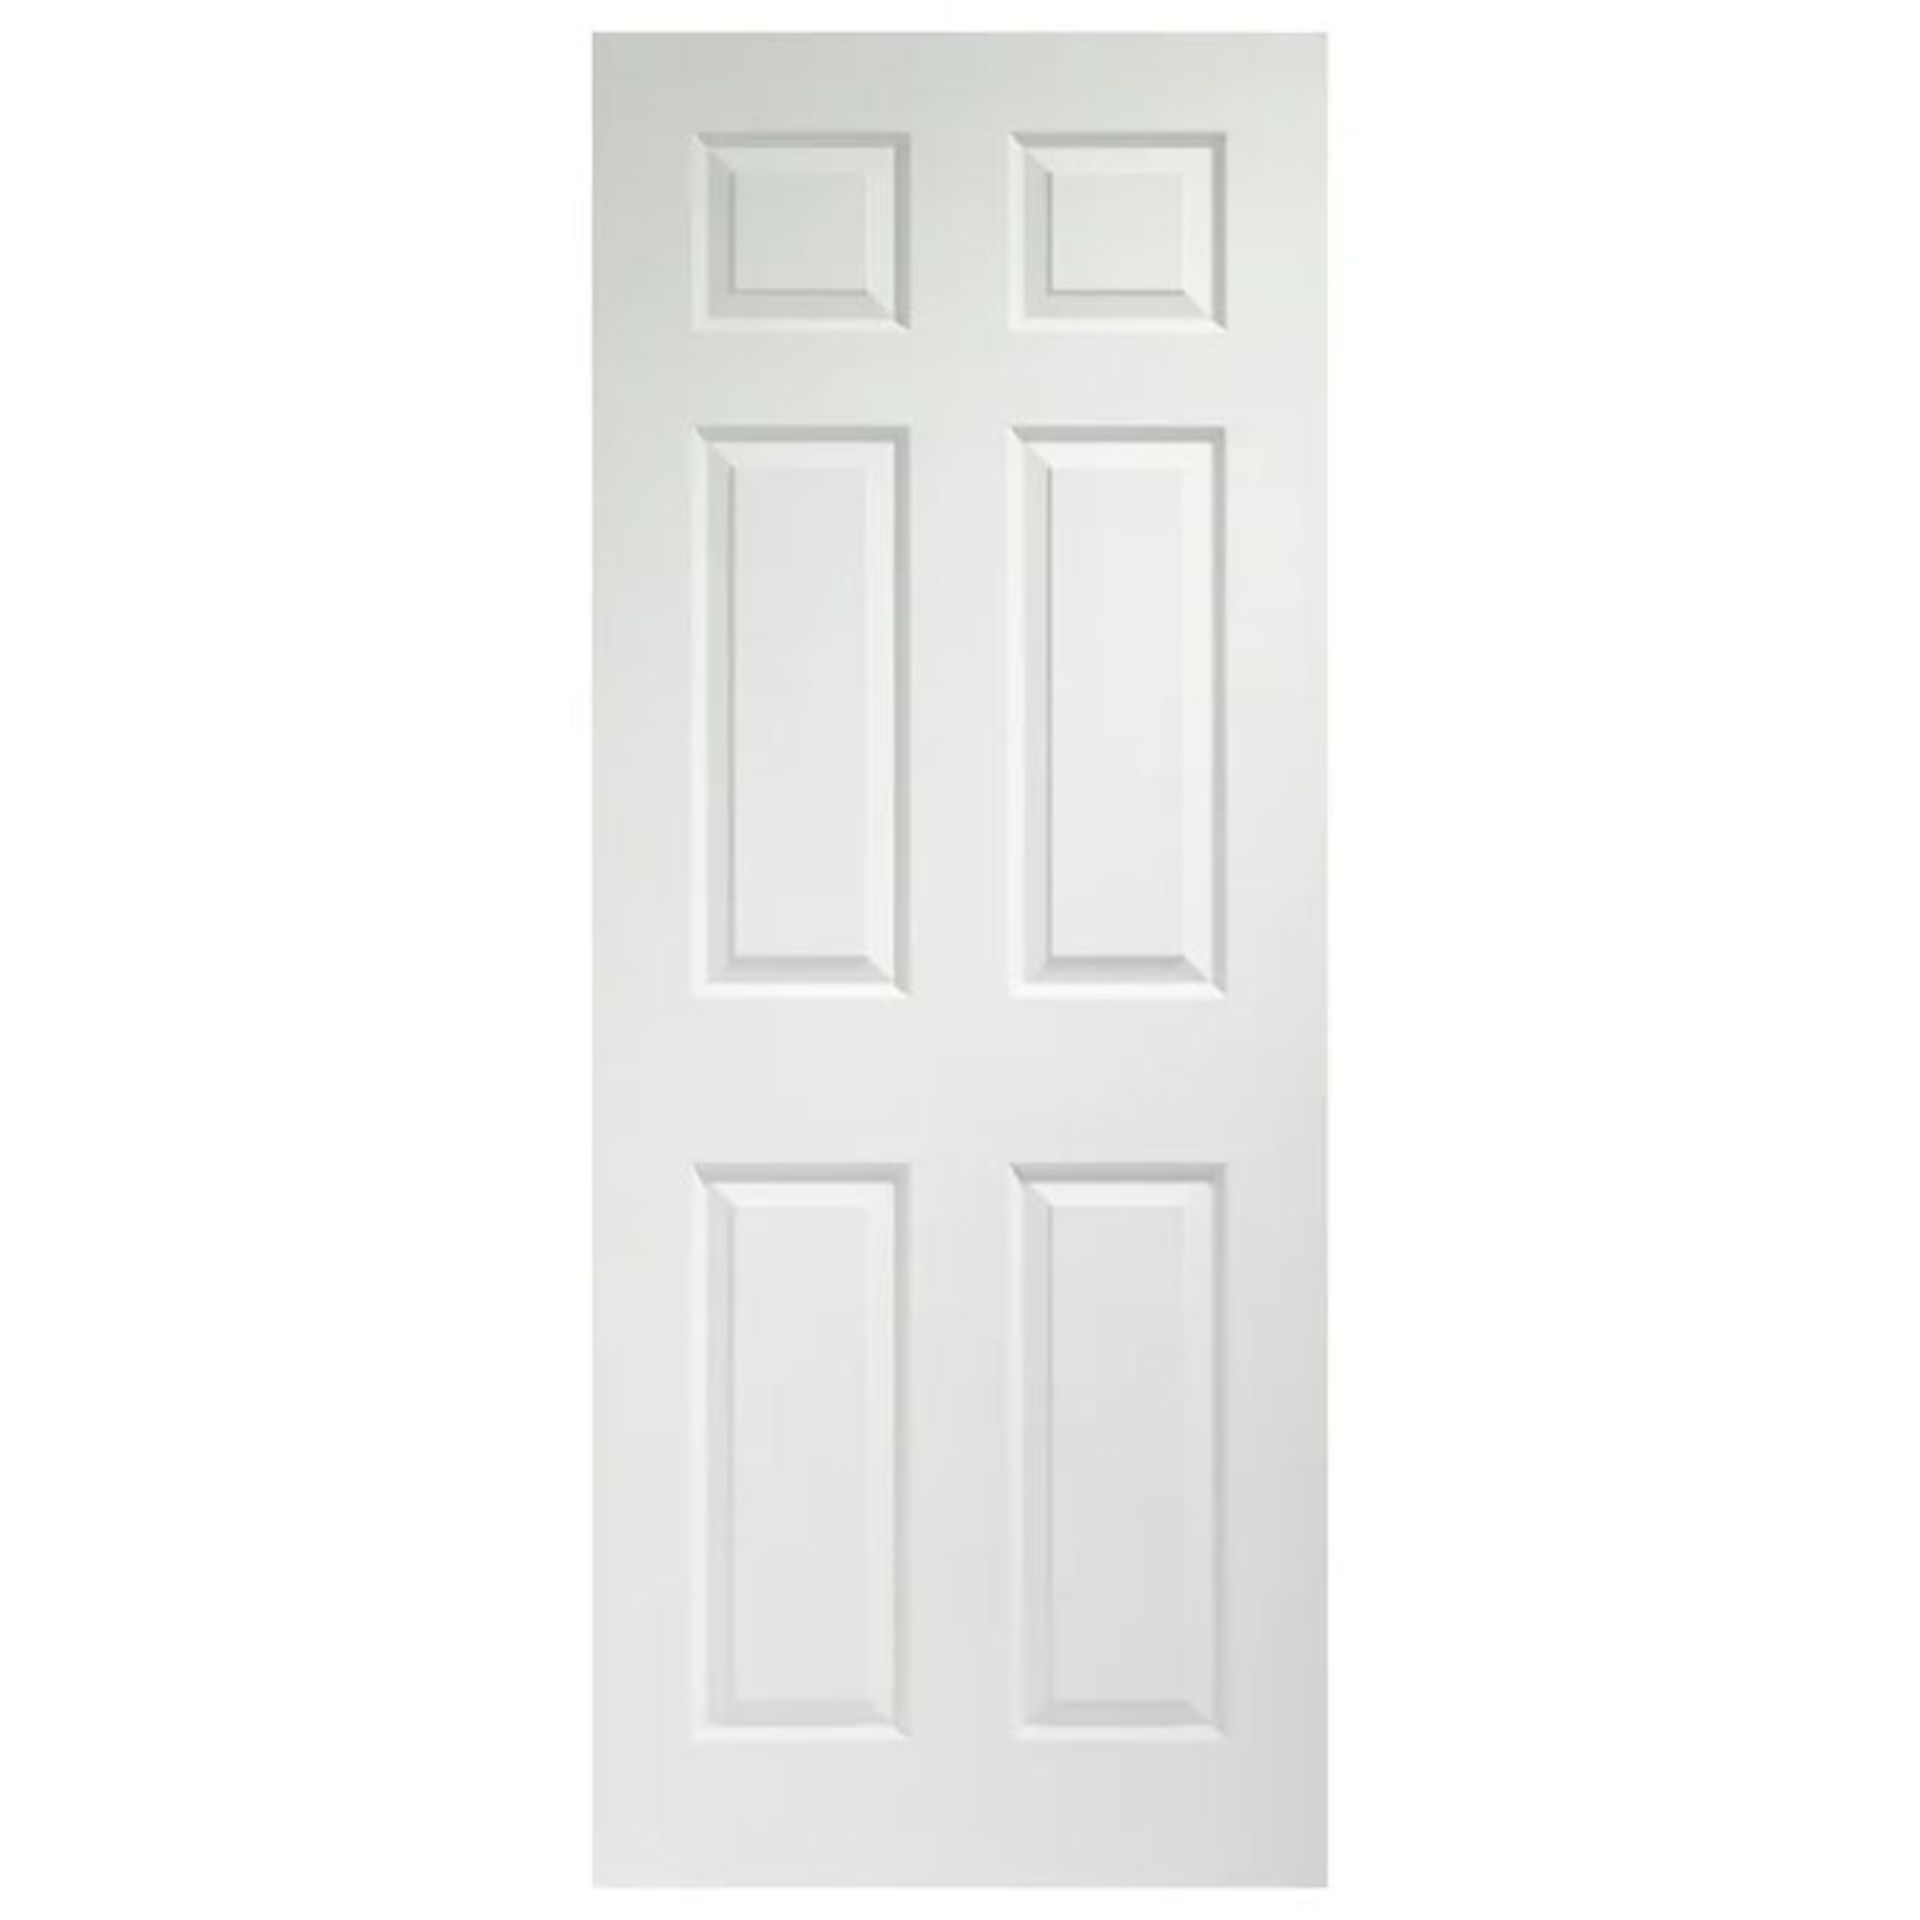 XL Joinery,Colonist Internal Door Prefinished (APPROX 198 x 76cm) (BOXED, RETURN, NOT CHECKED)